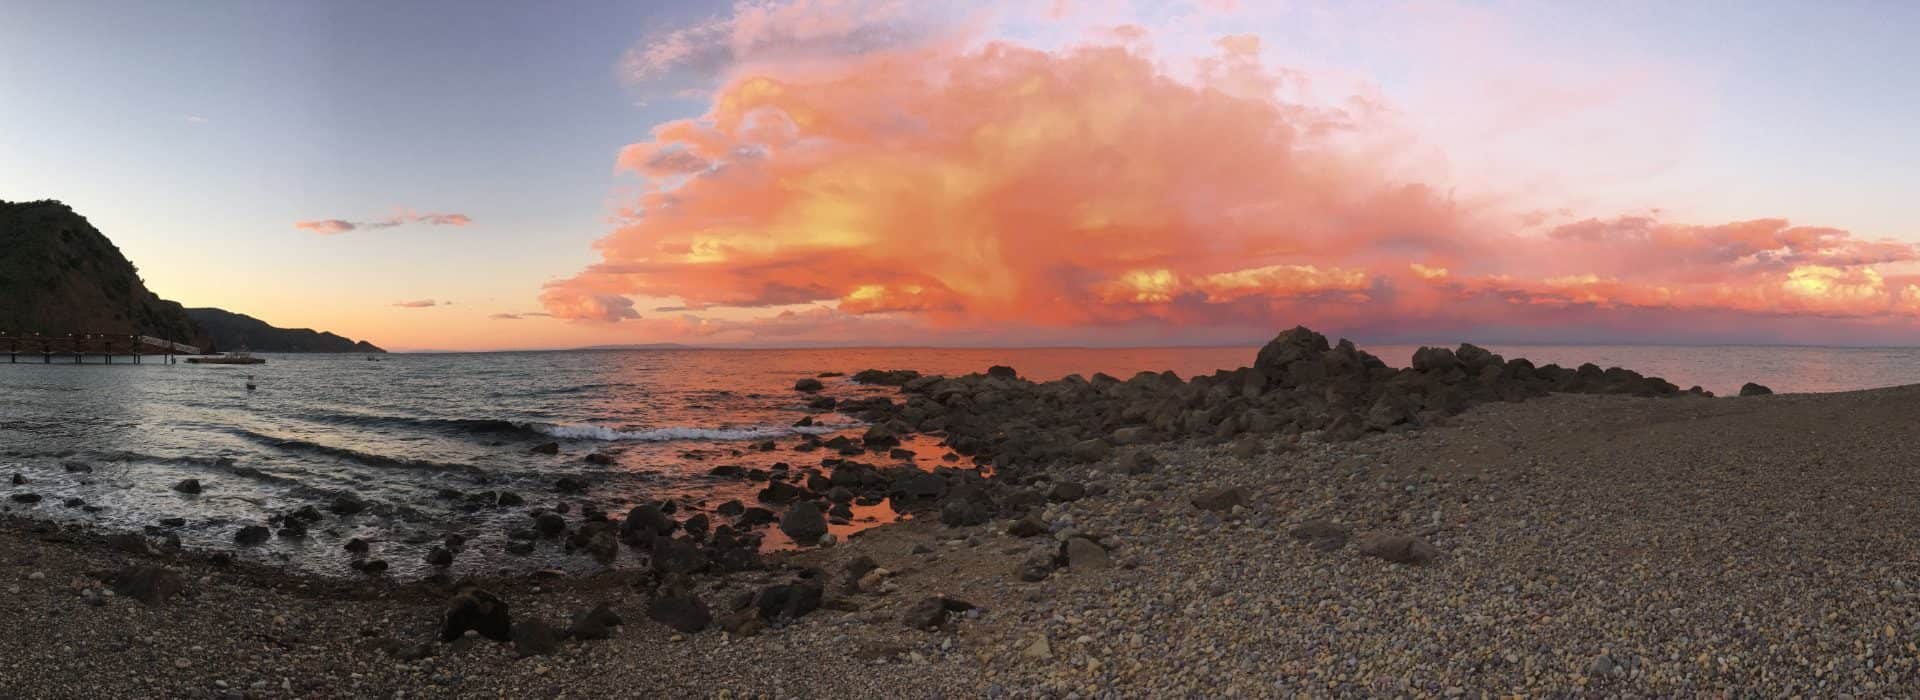 Beach with large rocks and pink colored clouds in the background